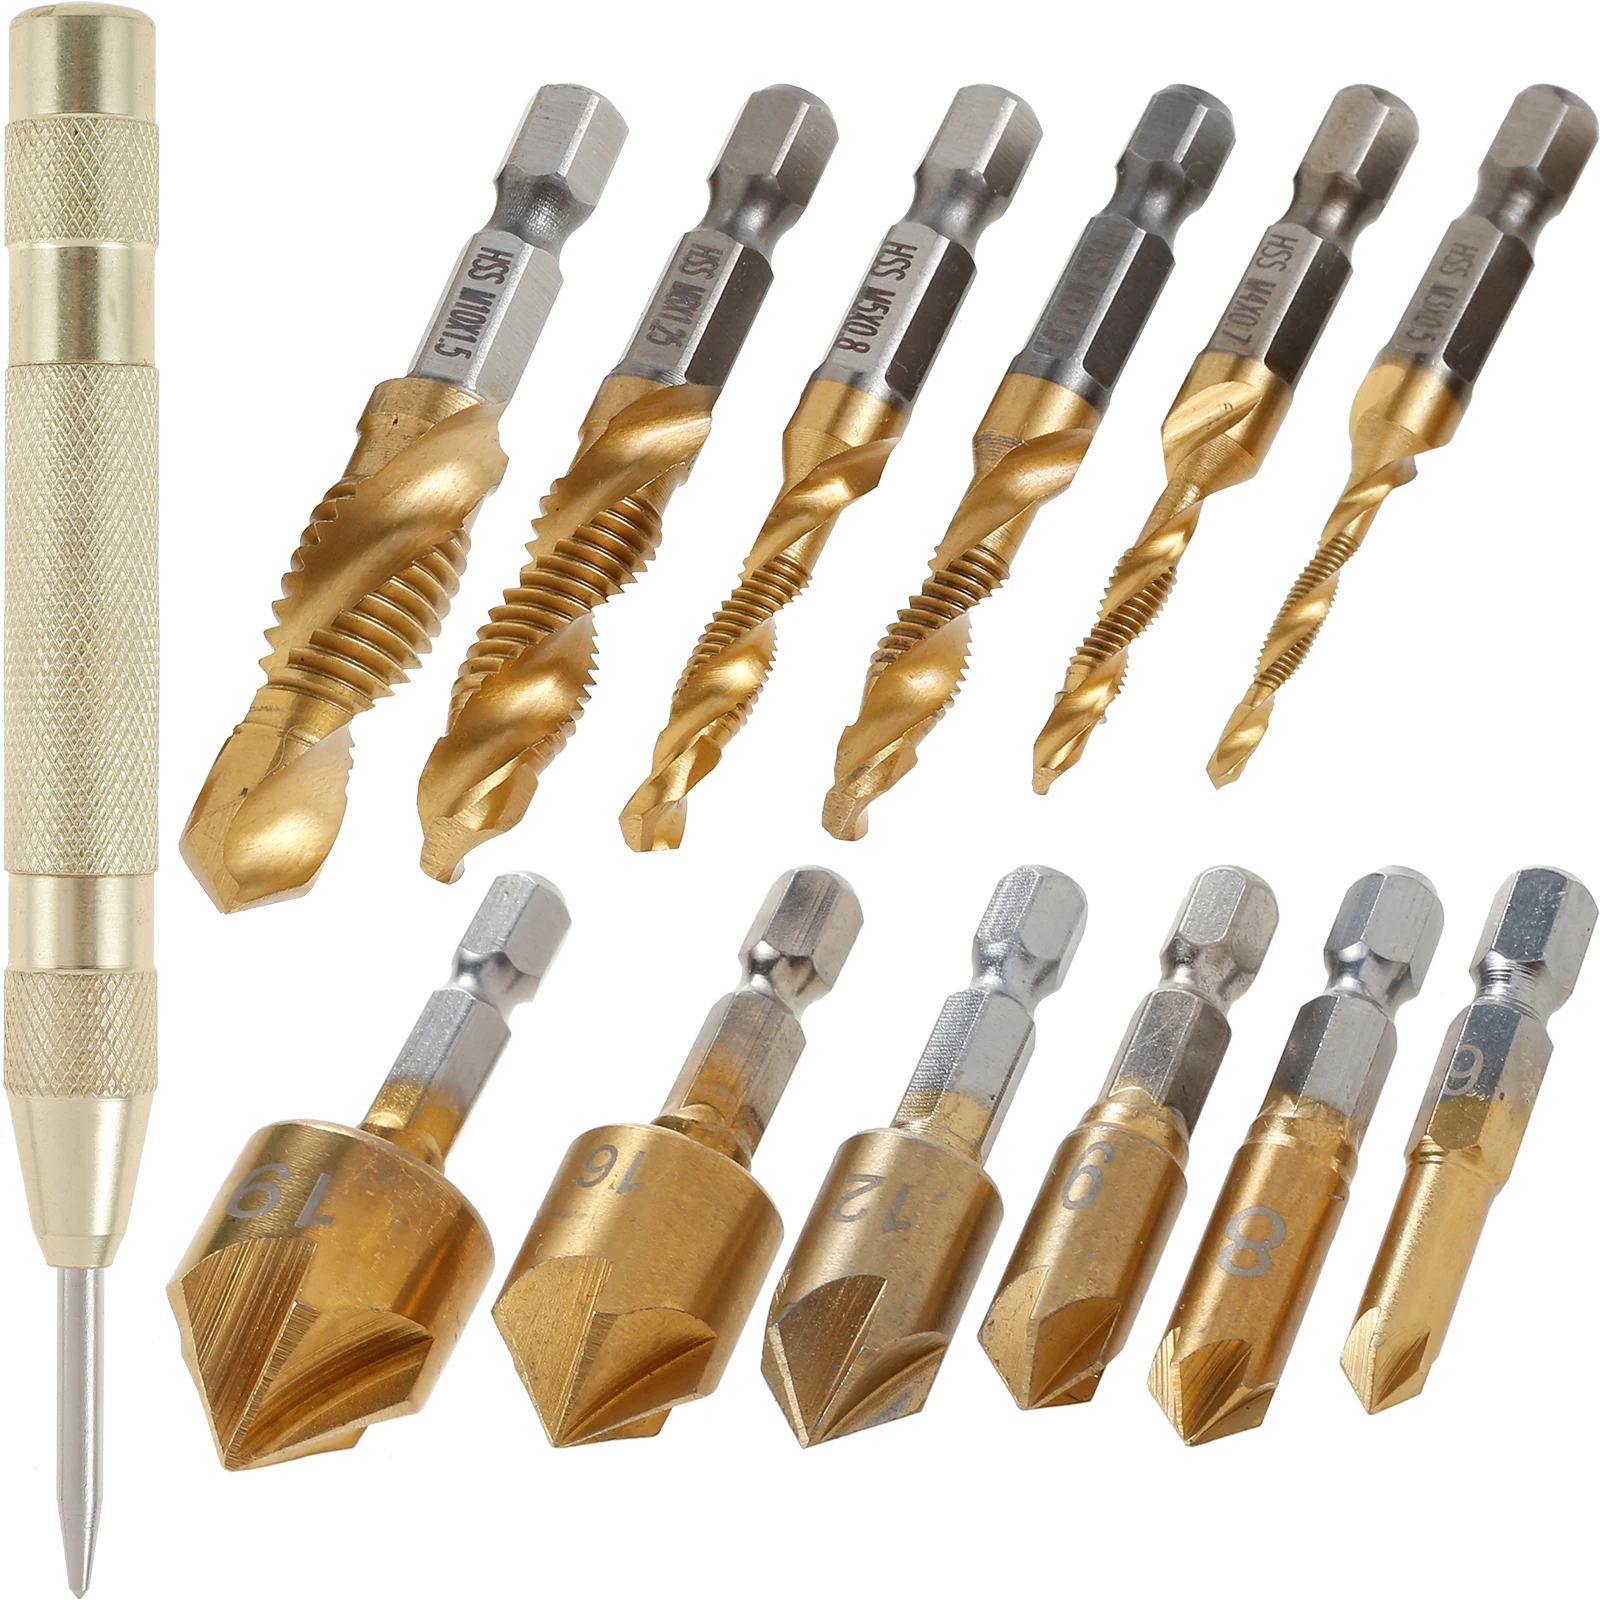 

13Pcs Countersink Drill Bit Hex Shank Titanium Coating Screw Tapping Drill Bit Spring Loaded Automatic Center Punch Woodworking